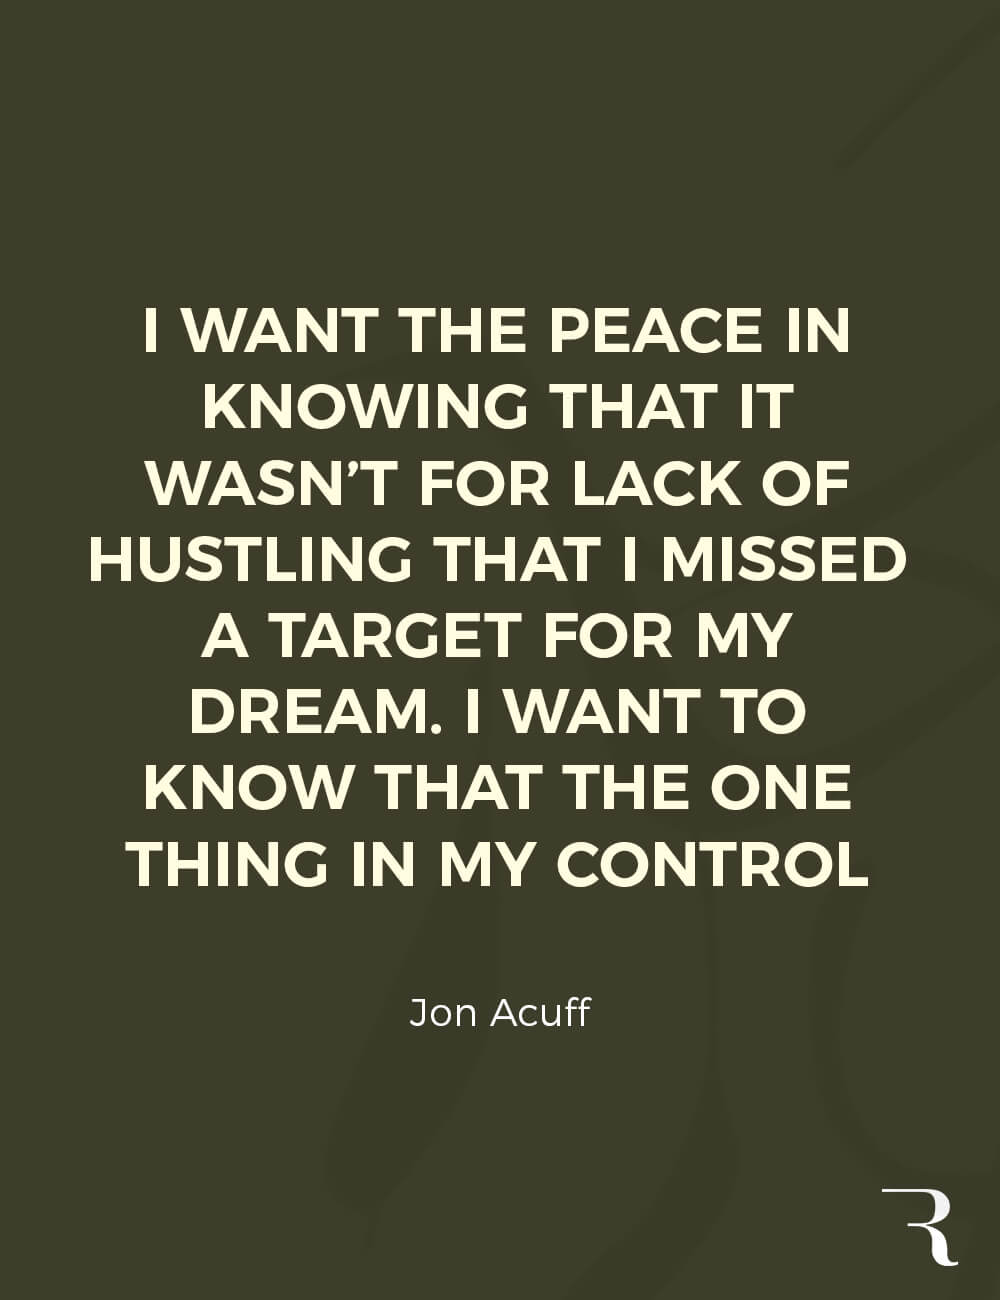 Motivational Quotes: “I want the peace in knowing that it wasn’t for lack of hustling that I missed a target for my dream.” 112 Motivational Quotes to Be a Better Entrepreneur